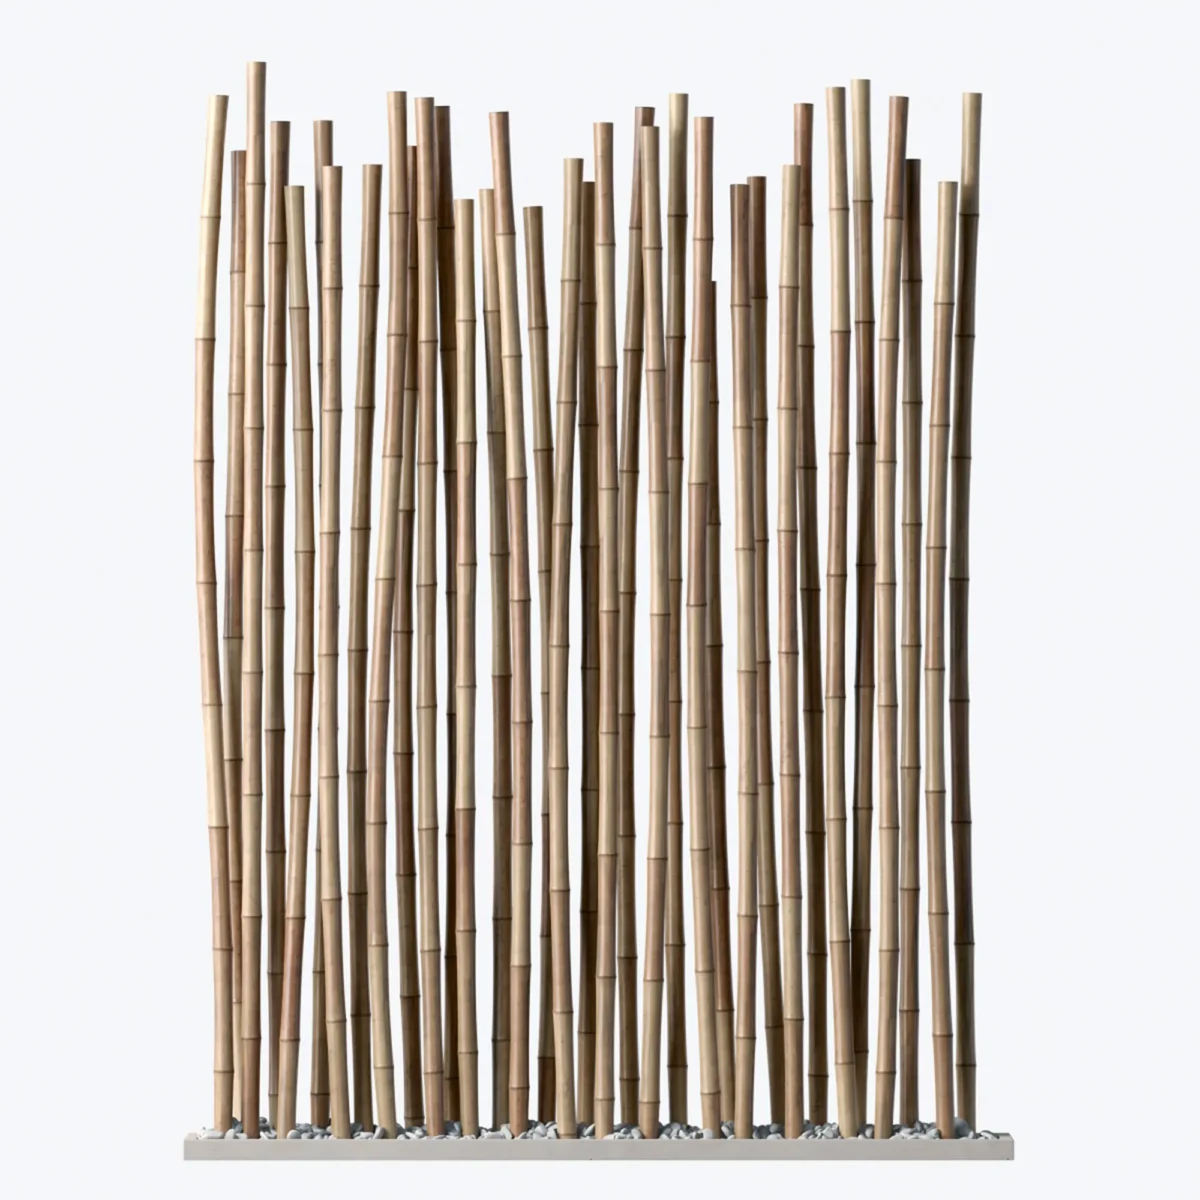 Bamboo decor N18A 3D model download on cg.market 3ds max, CoronaRender, V-Ray